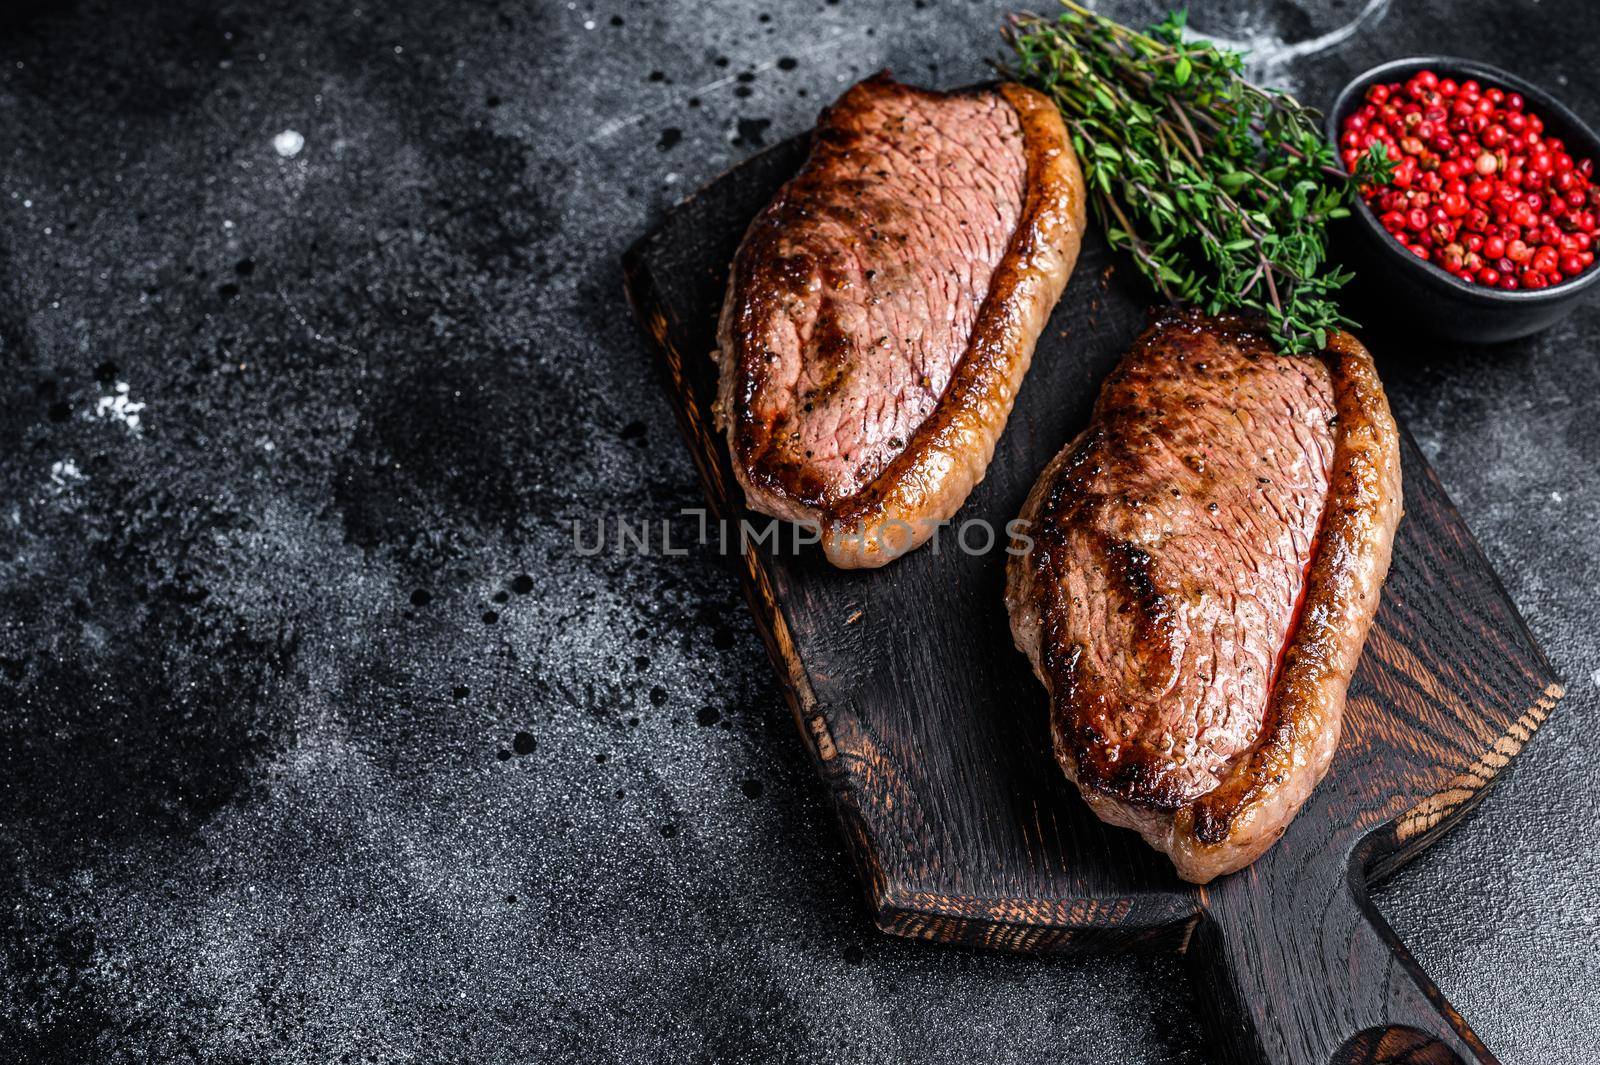 BBQ Grilled top sirloin cap or picanha steak on a wooden cutting board. Black background. Top view. Copy space.